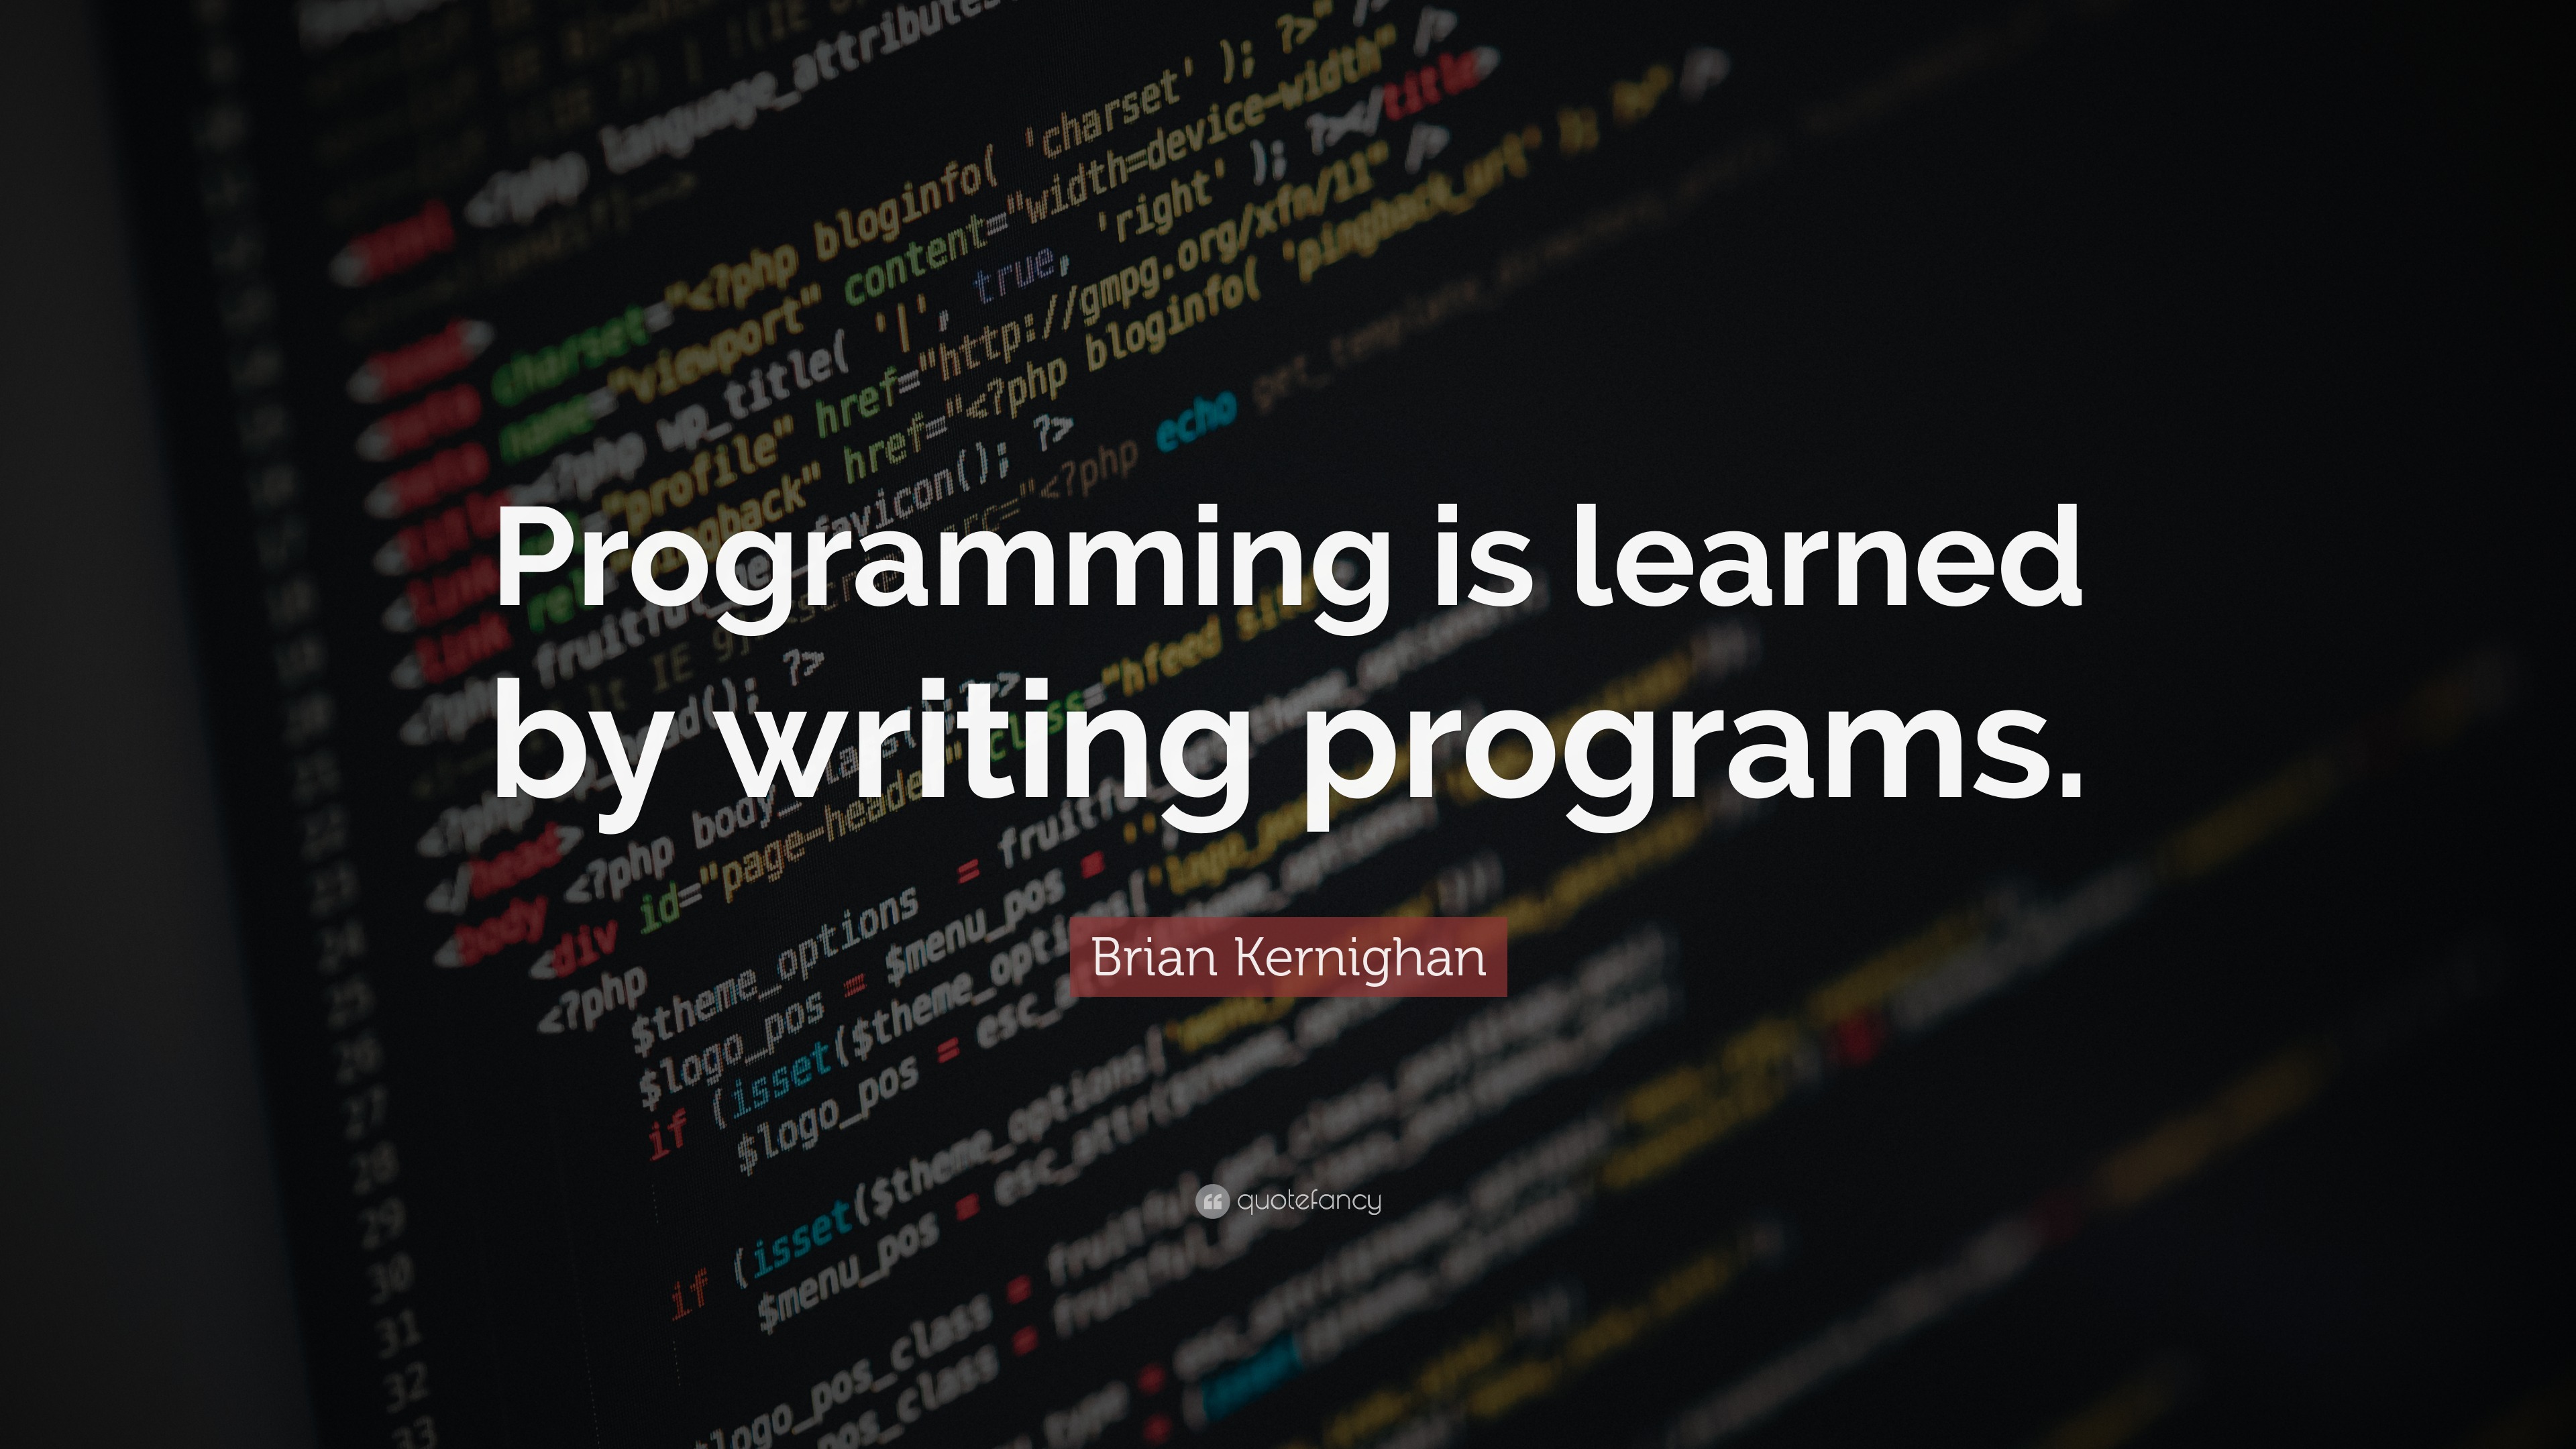 Brian Kernighan Quote: “Programming is learned by writing programs.”